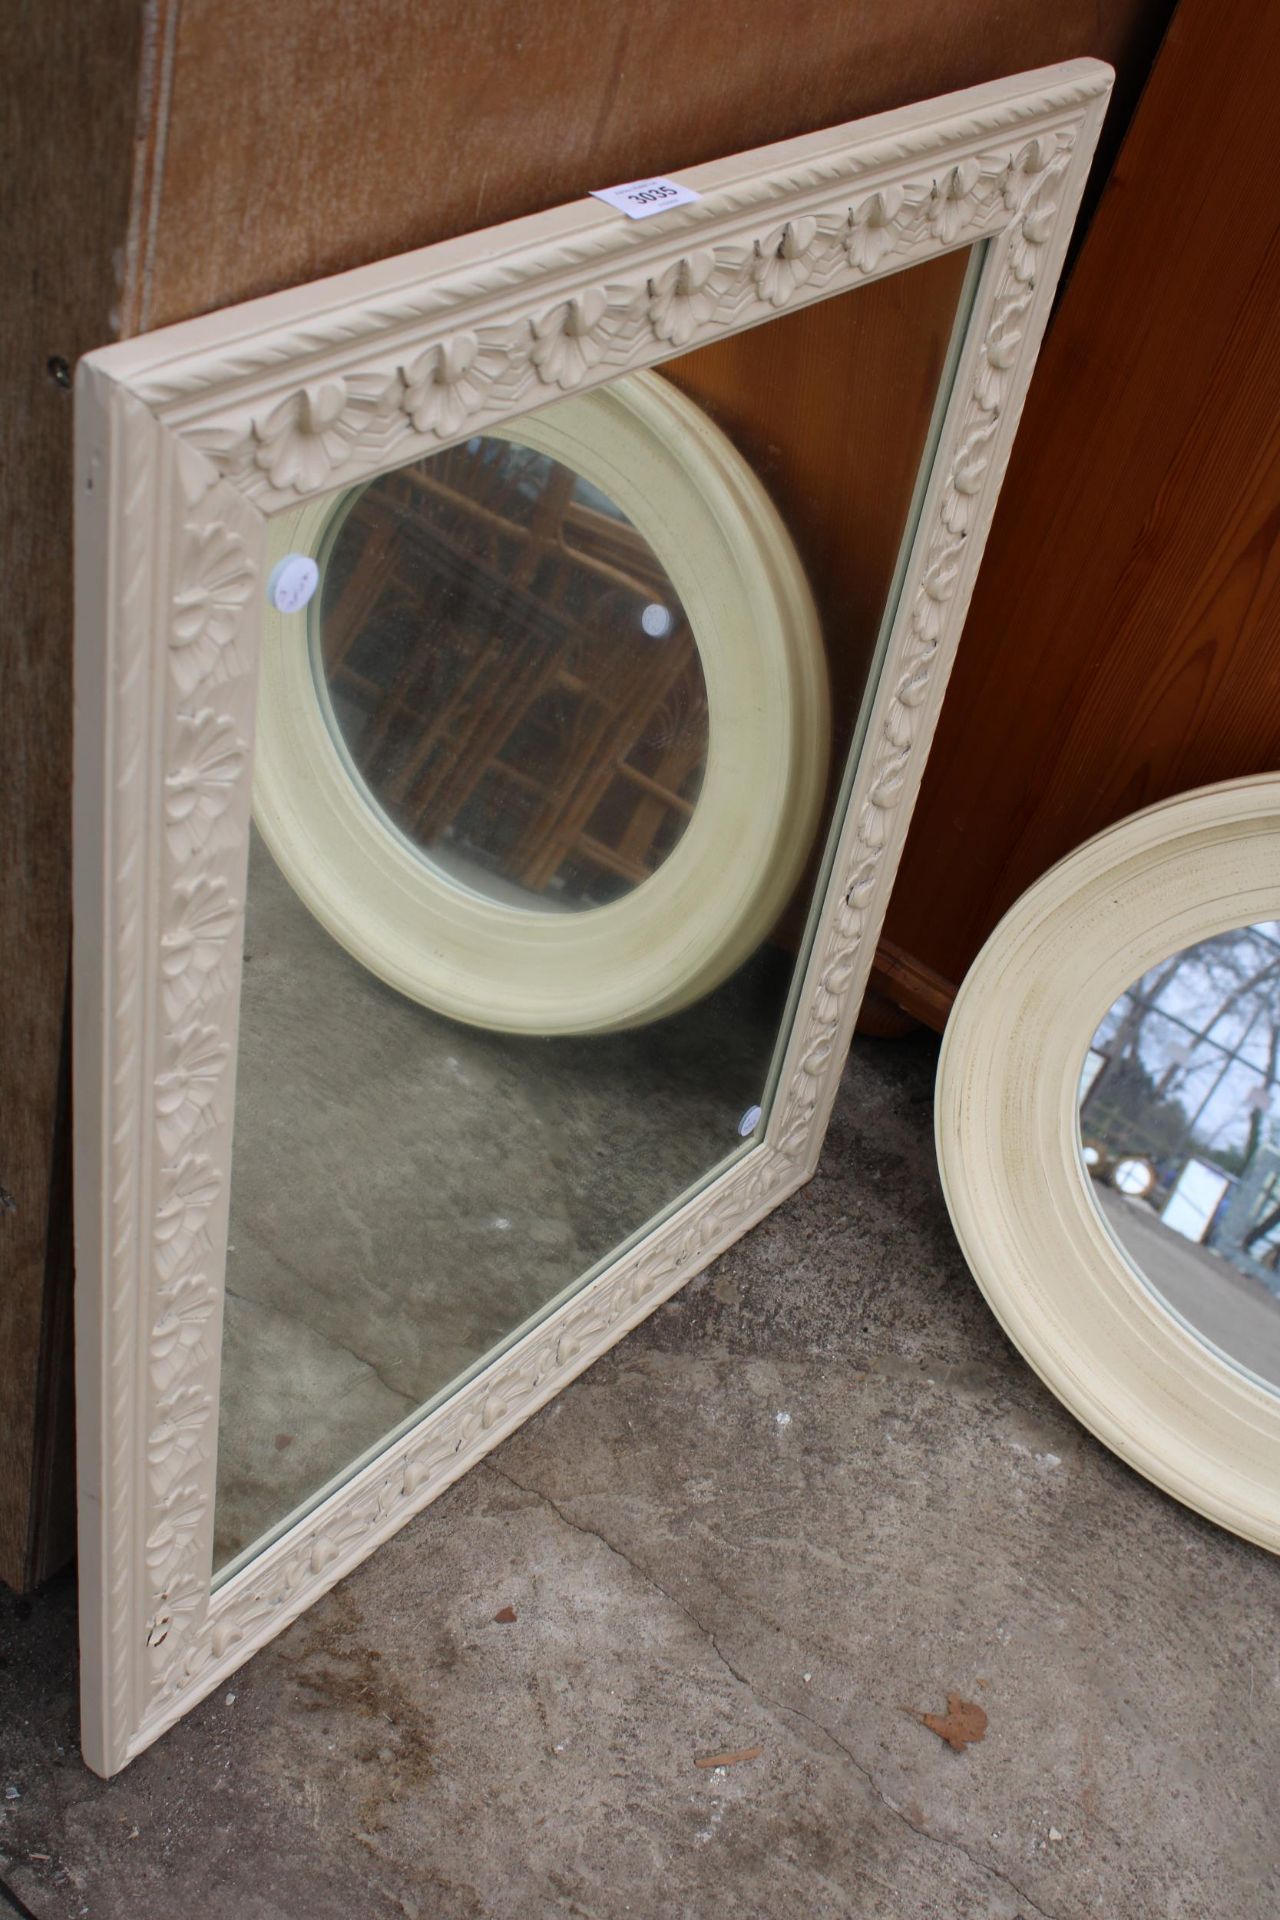 TWO WHITE WALL MIRRORS - ONE CIRCULAR 9172 DIAMETER AND ONE RECTANGULAR - 27" X 25" - Image 2 of 3